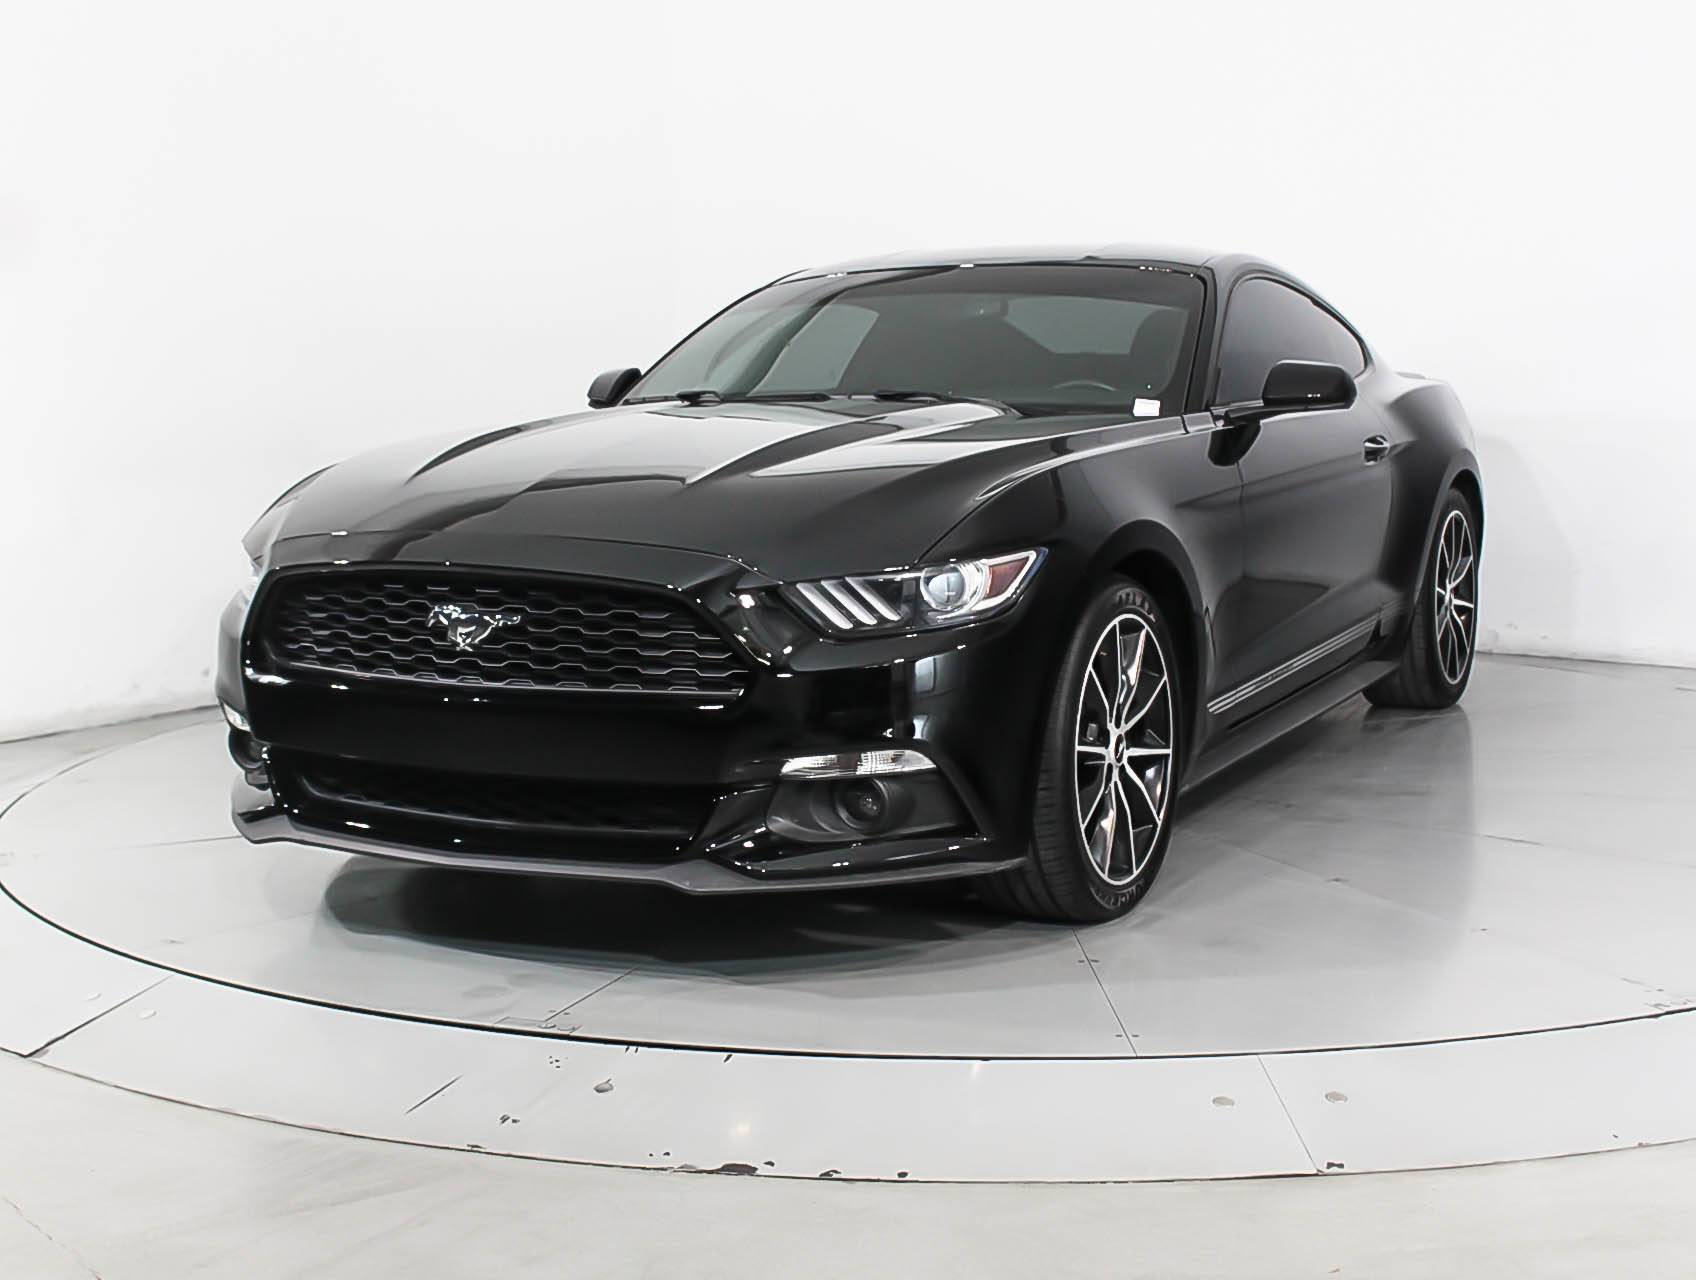 Florida Fine Cars - Used FORD MUSTANG 2016 HOLLYWOOD ECOBOOST